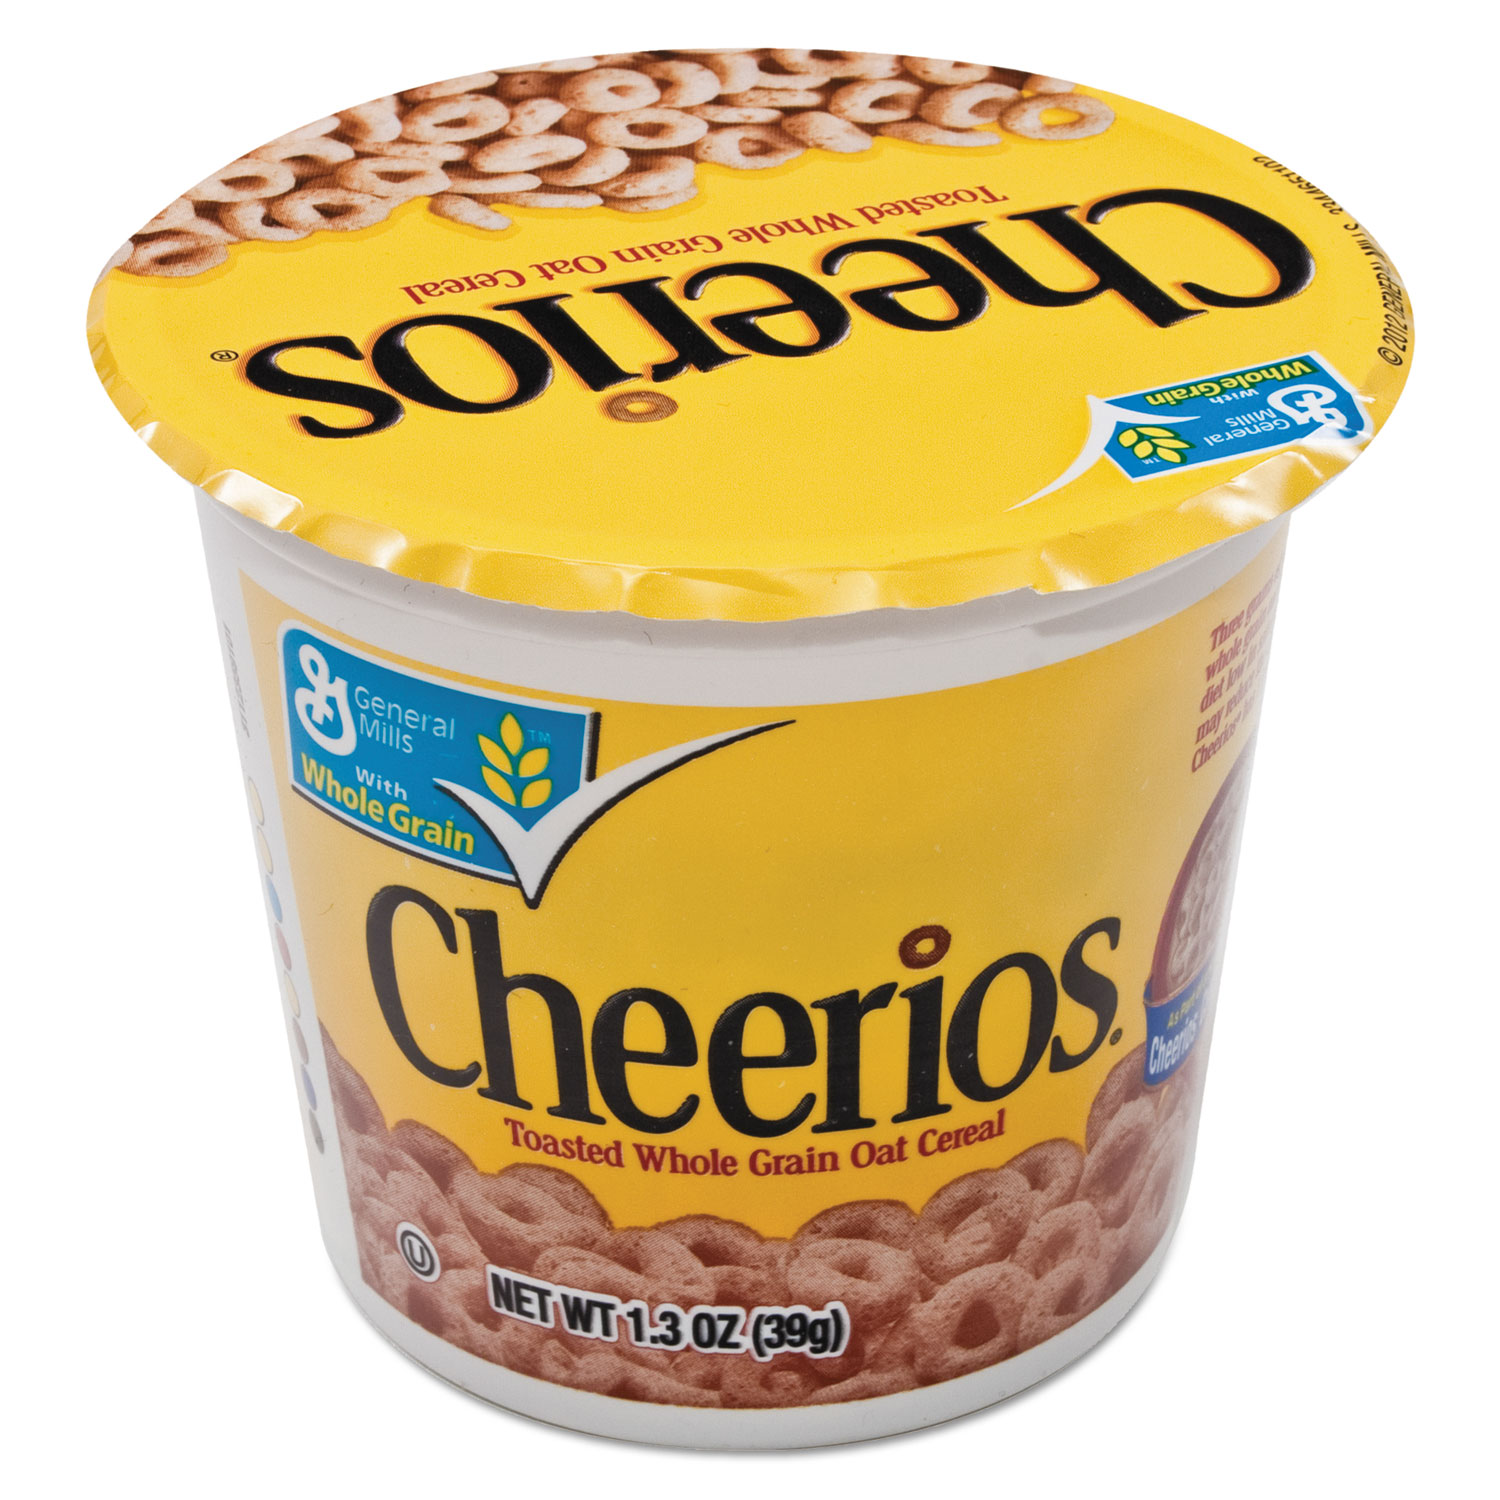 S'well Cheerios promotion stainless steel bowl finally came